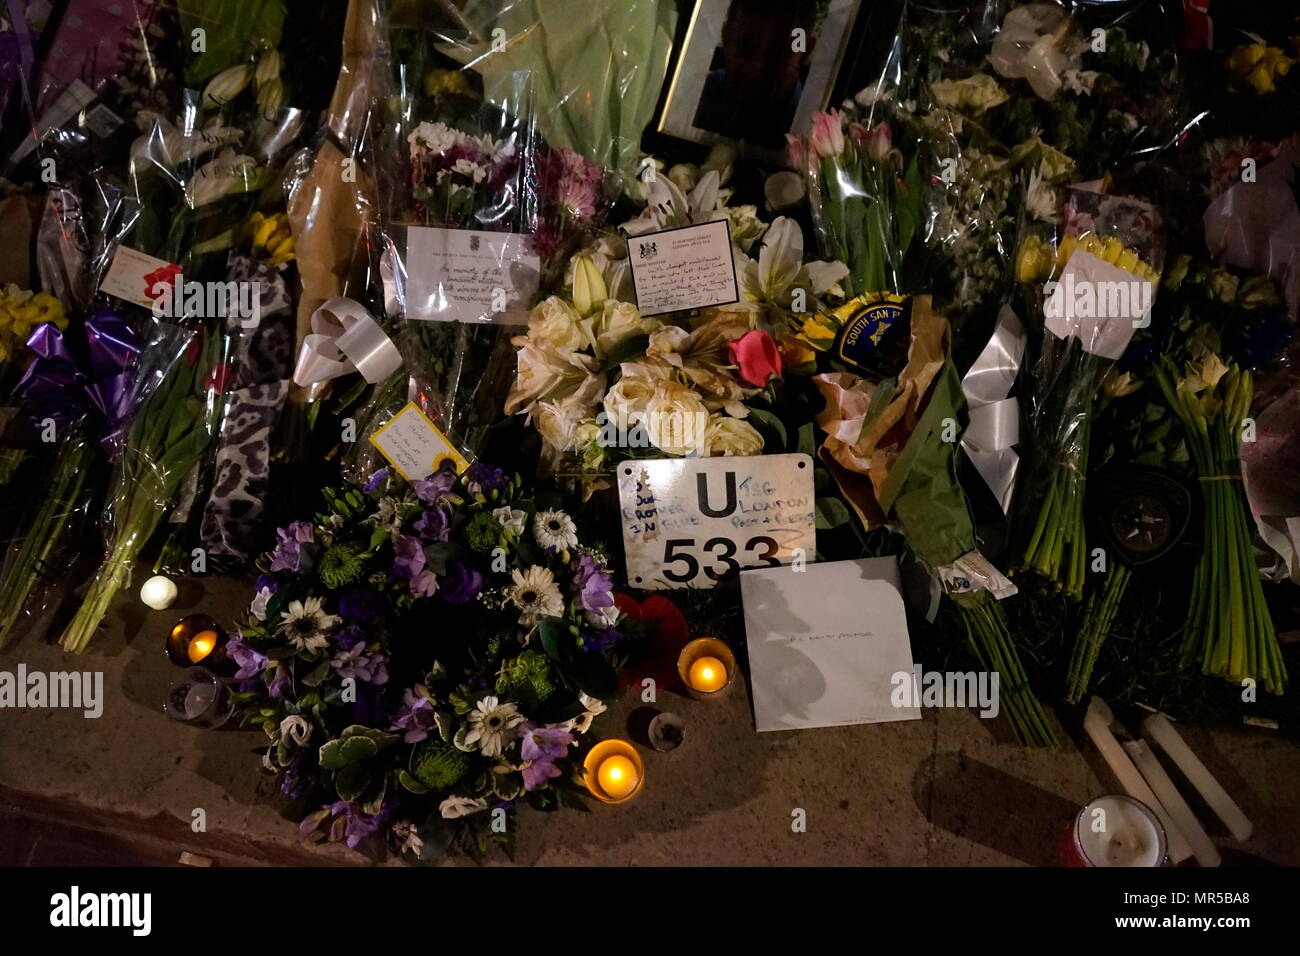 Photograph showing the tributes placed outside of Parliament in London, after the 22 March 2017, terrorist attack. The attacker, 52-year-old Briton Khalid Masood, drove a car into pedestrians on the pavement along the south side of Westminster Bridge and Bridge Street, injuring more than 50 people, four of them fatal. Dated 21st Century Stock Photo